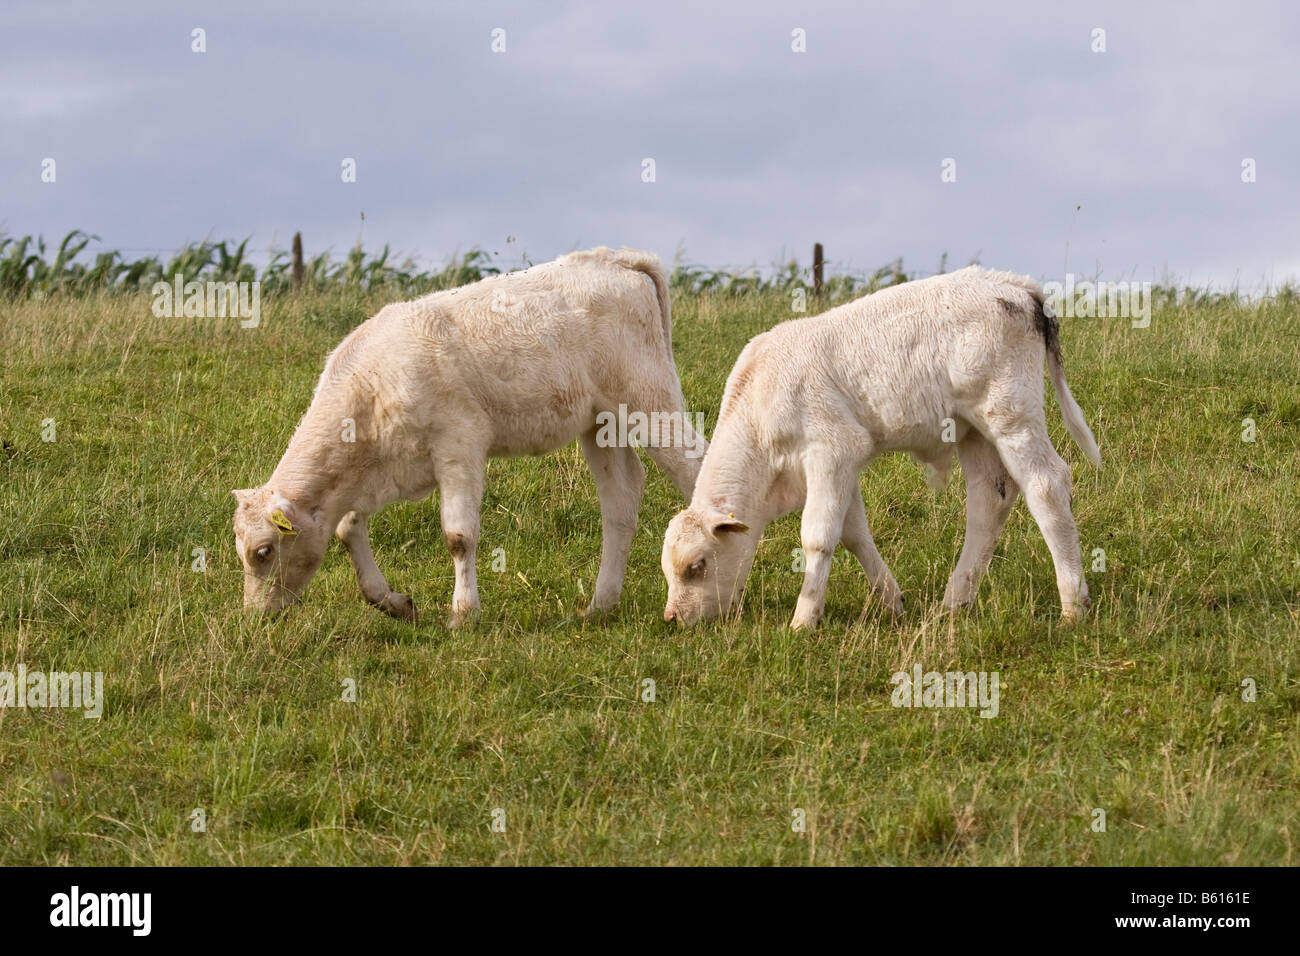 Two Charolais calves (Bos taurus) grazing in a meadow Stock Photo